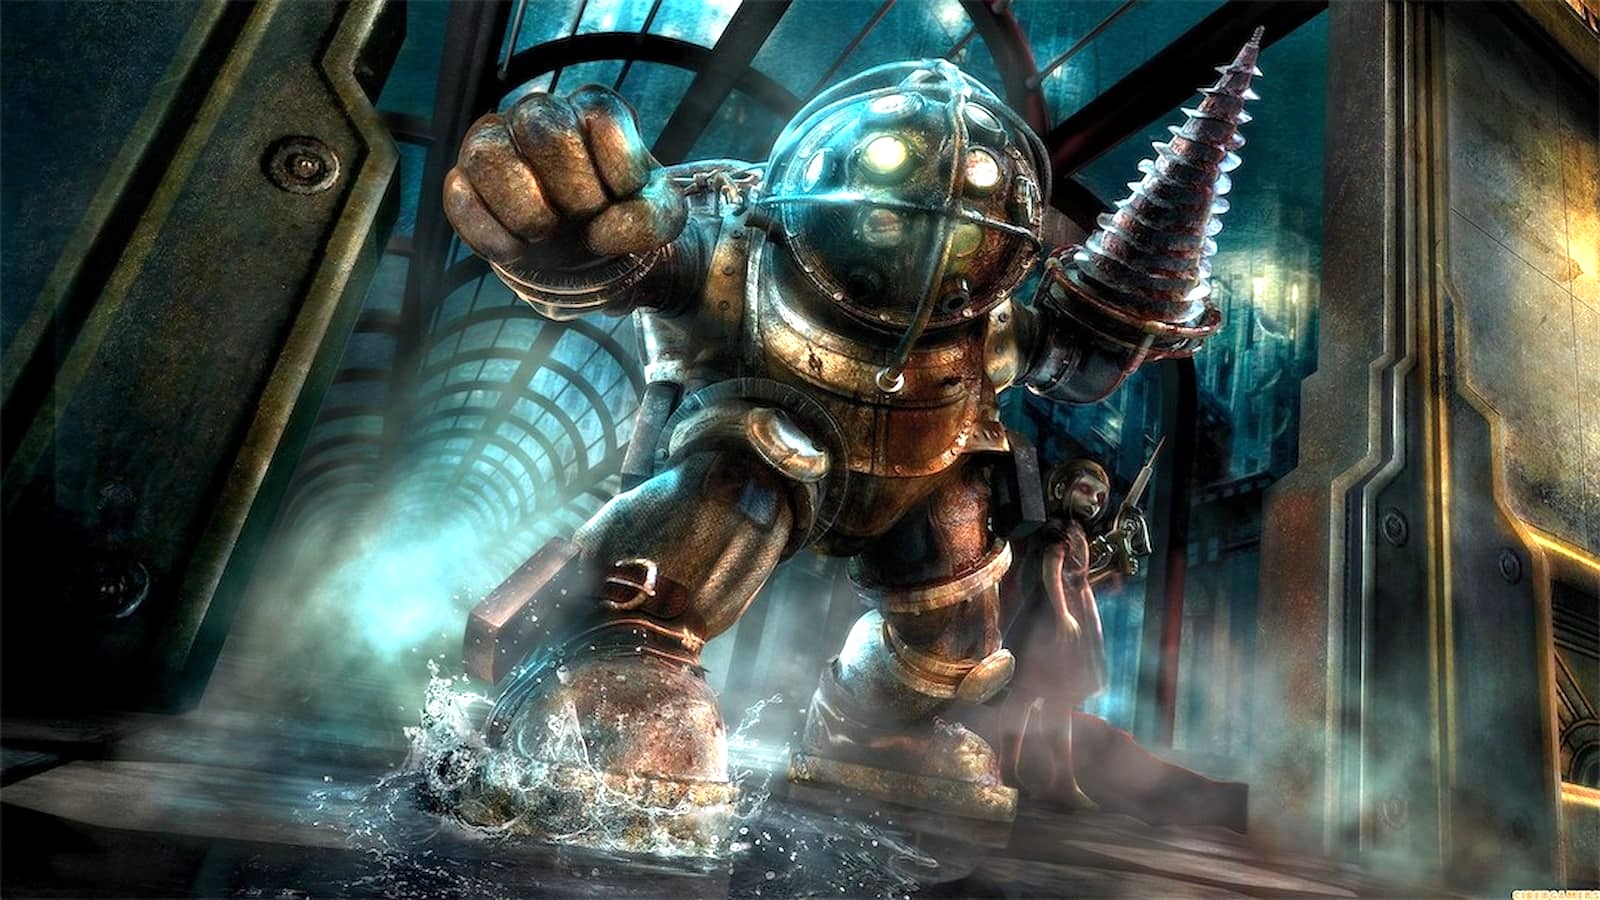 BioShock Collection with Big Daddy and Little Sister